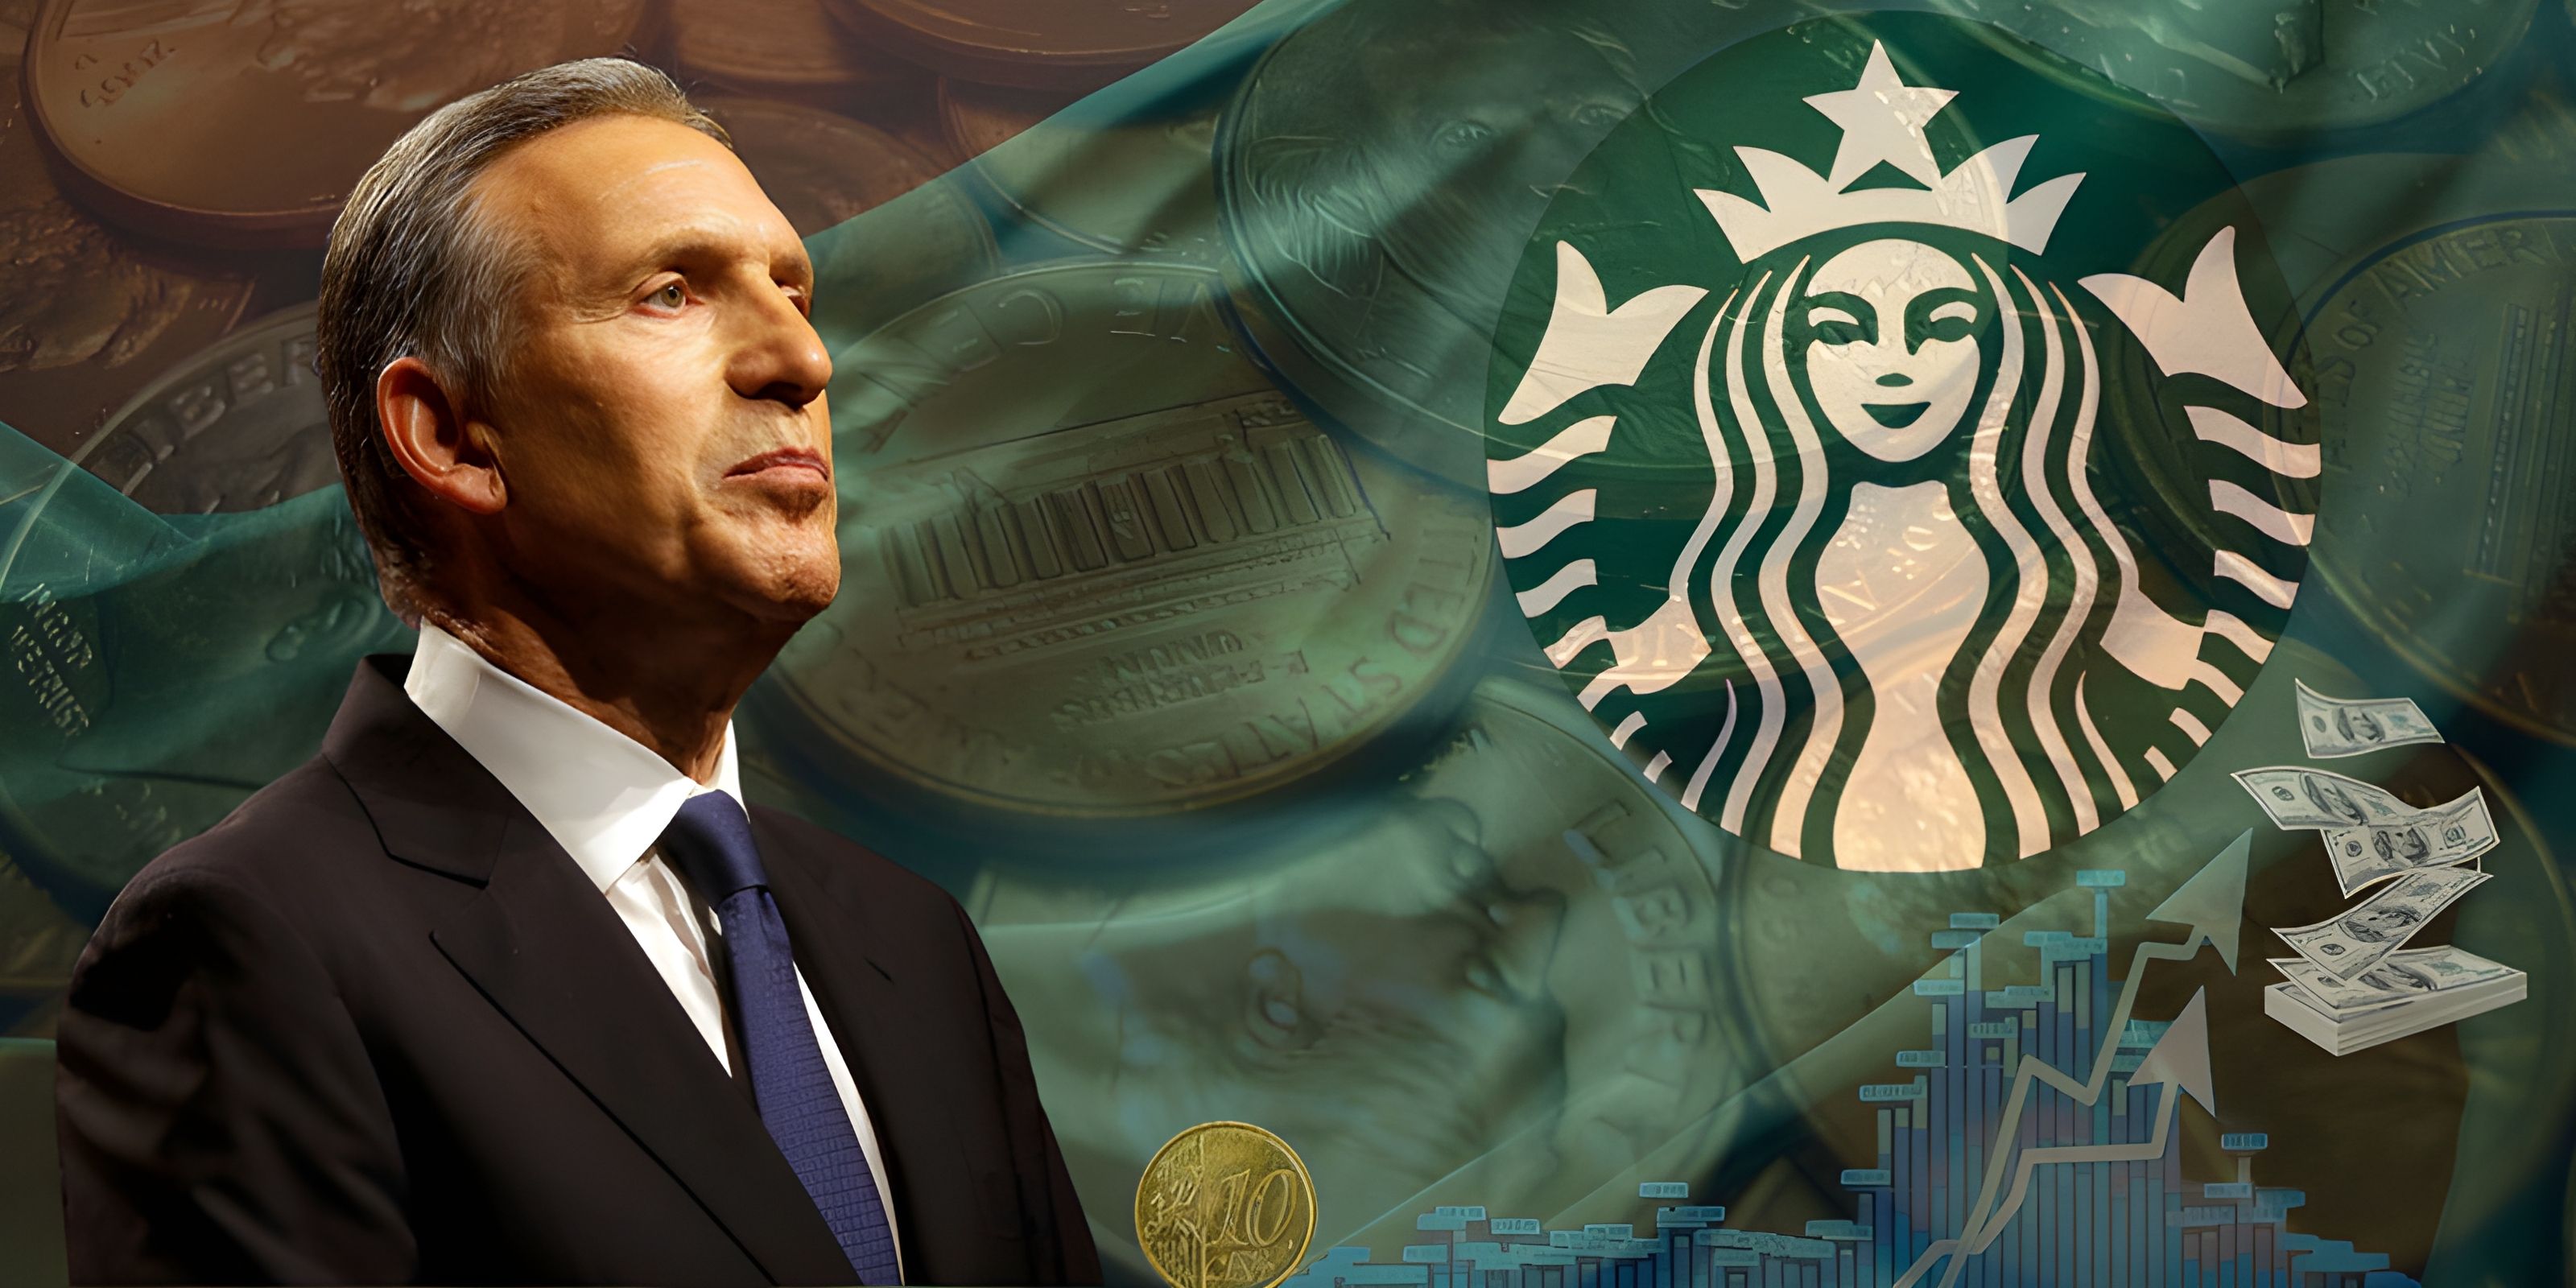 How Starbucks' 10 Cent Price Hike Brewed $85M: Lessons in Strategic Pricing